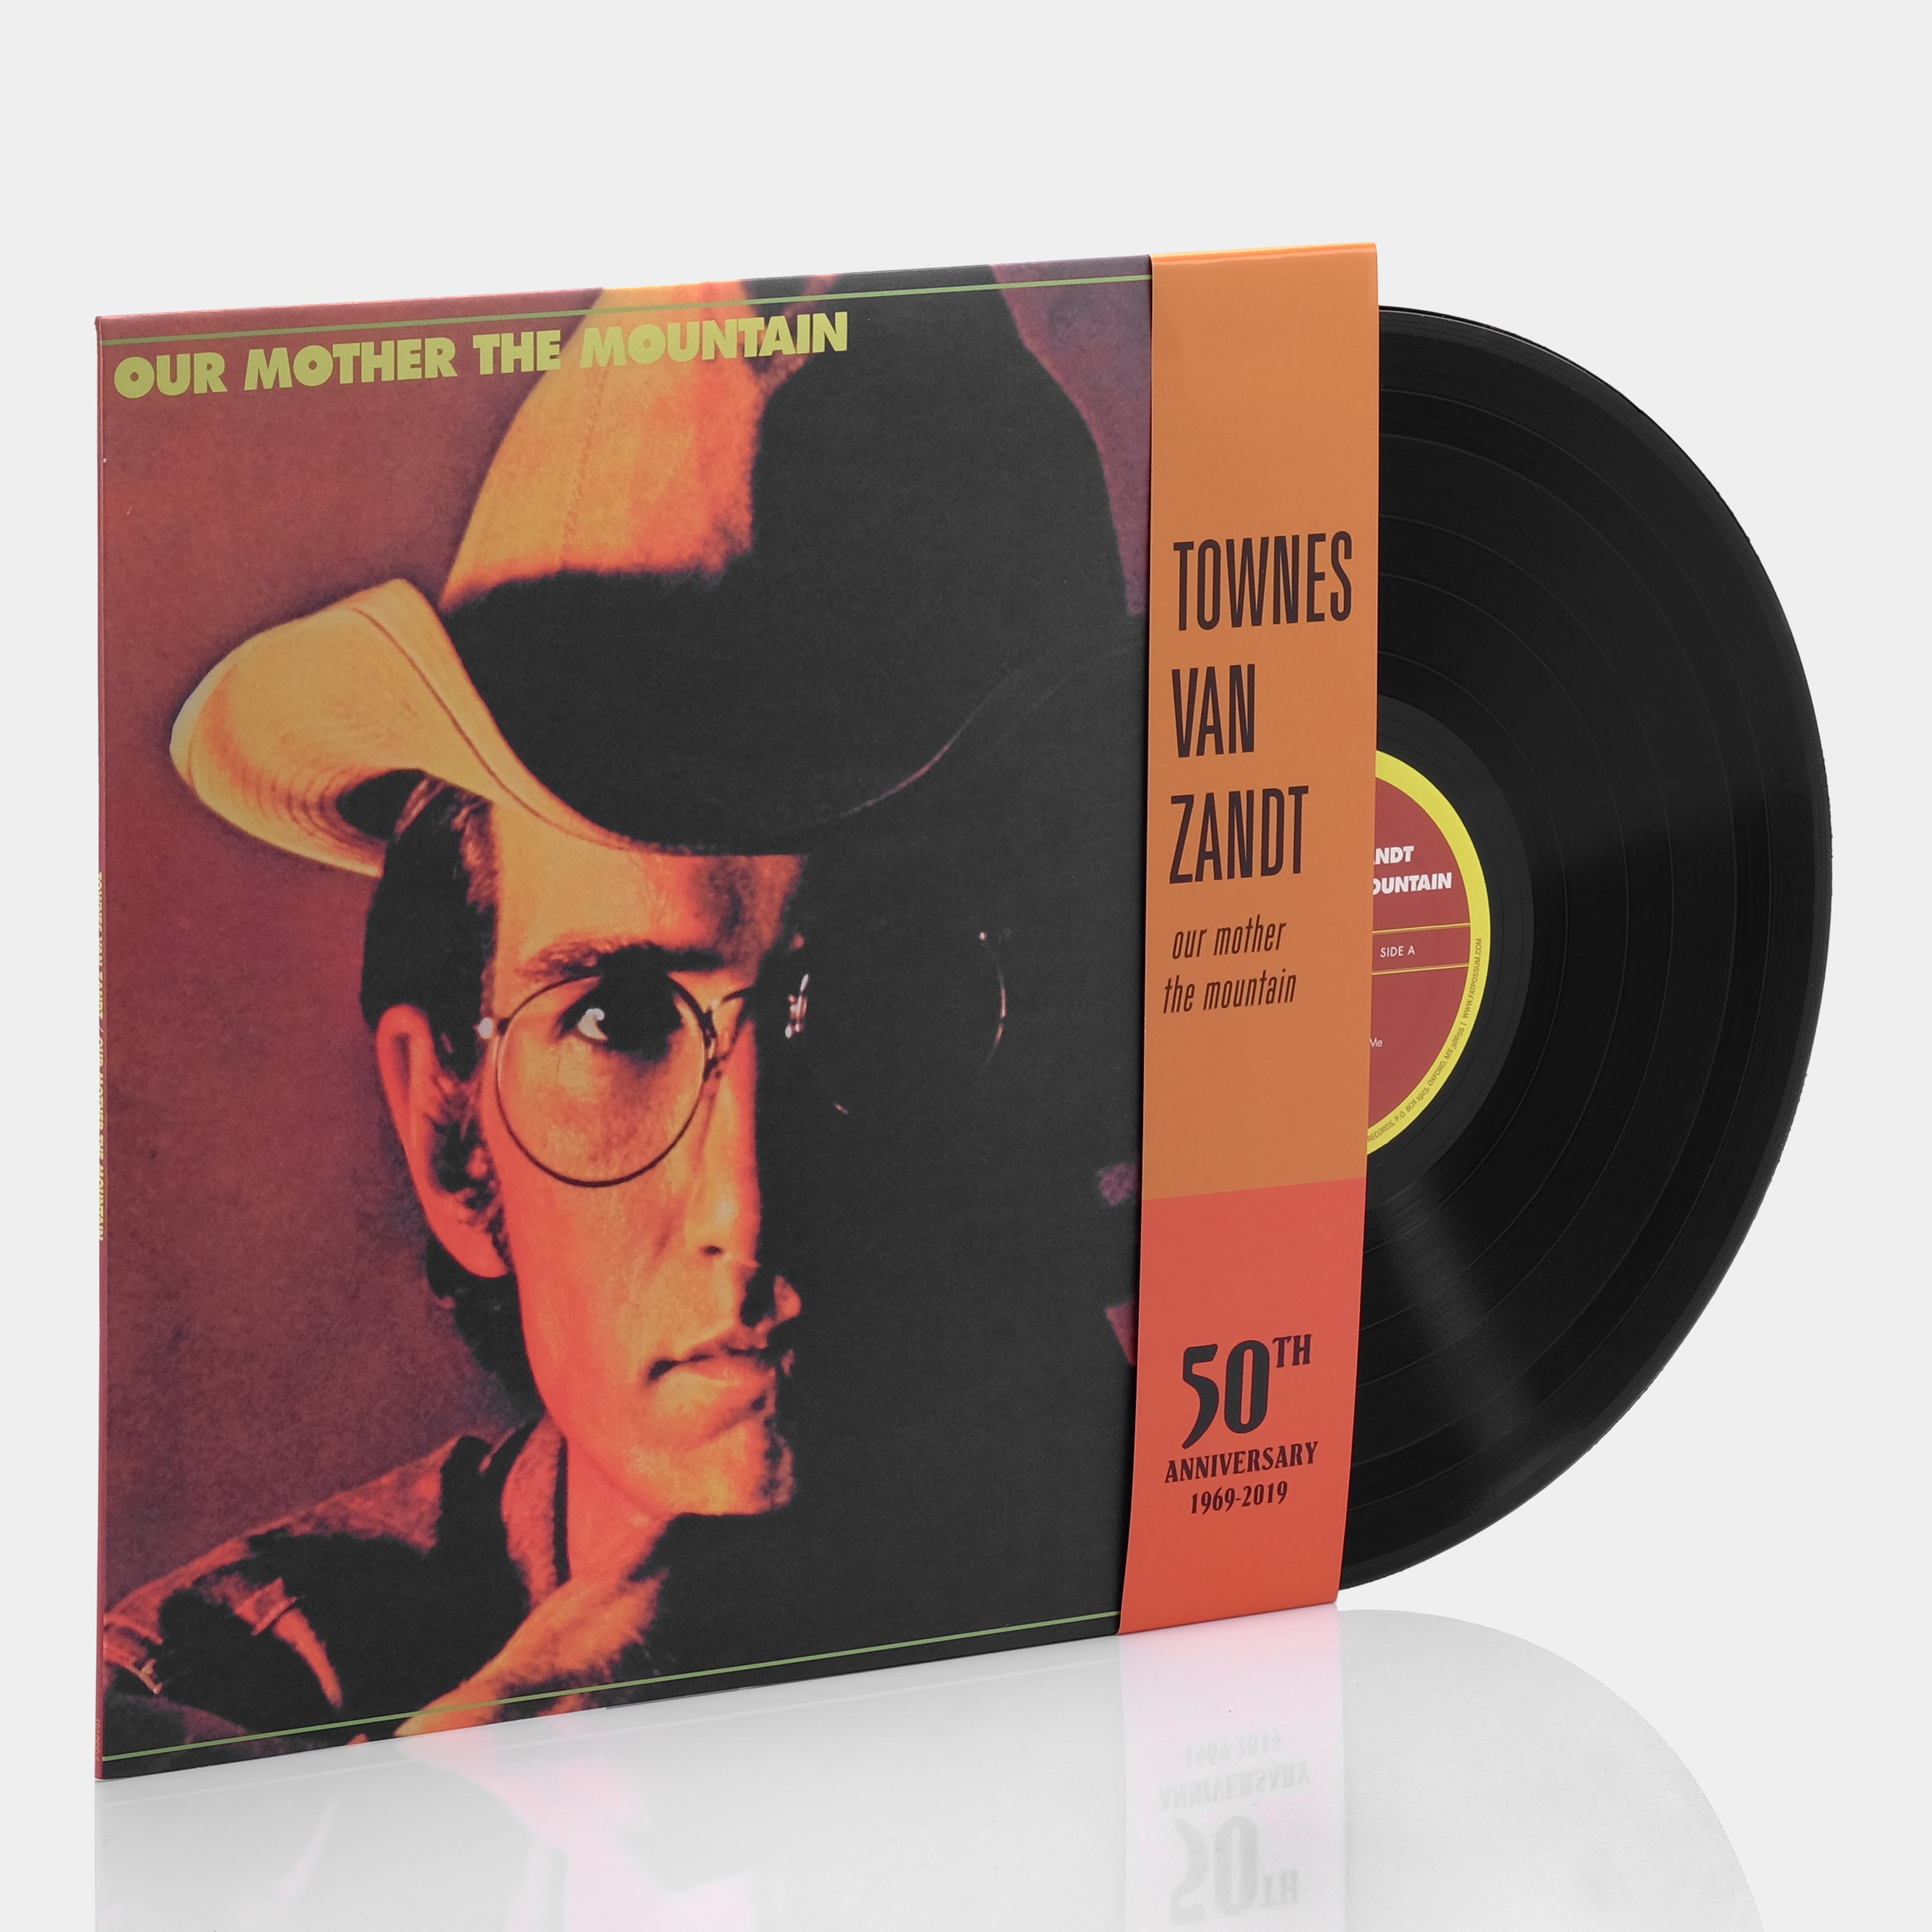 Townes Van Zandt - Our Mother The Mountain (50th Anniversary Edition) LP Vinyl Record